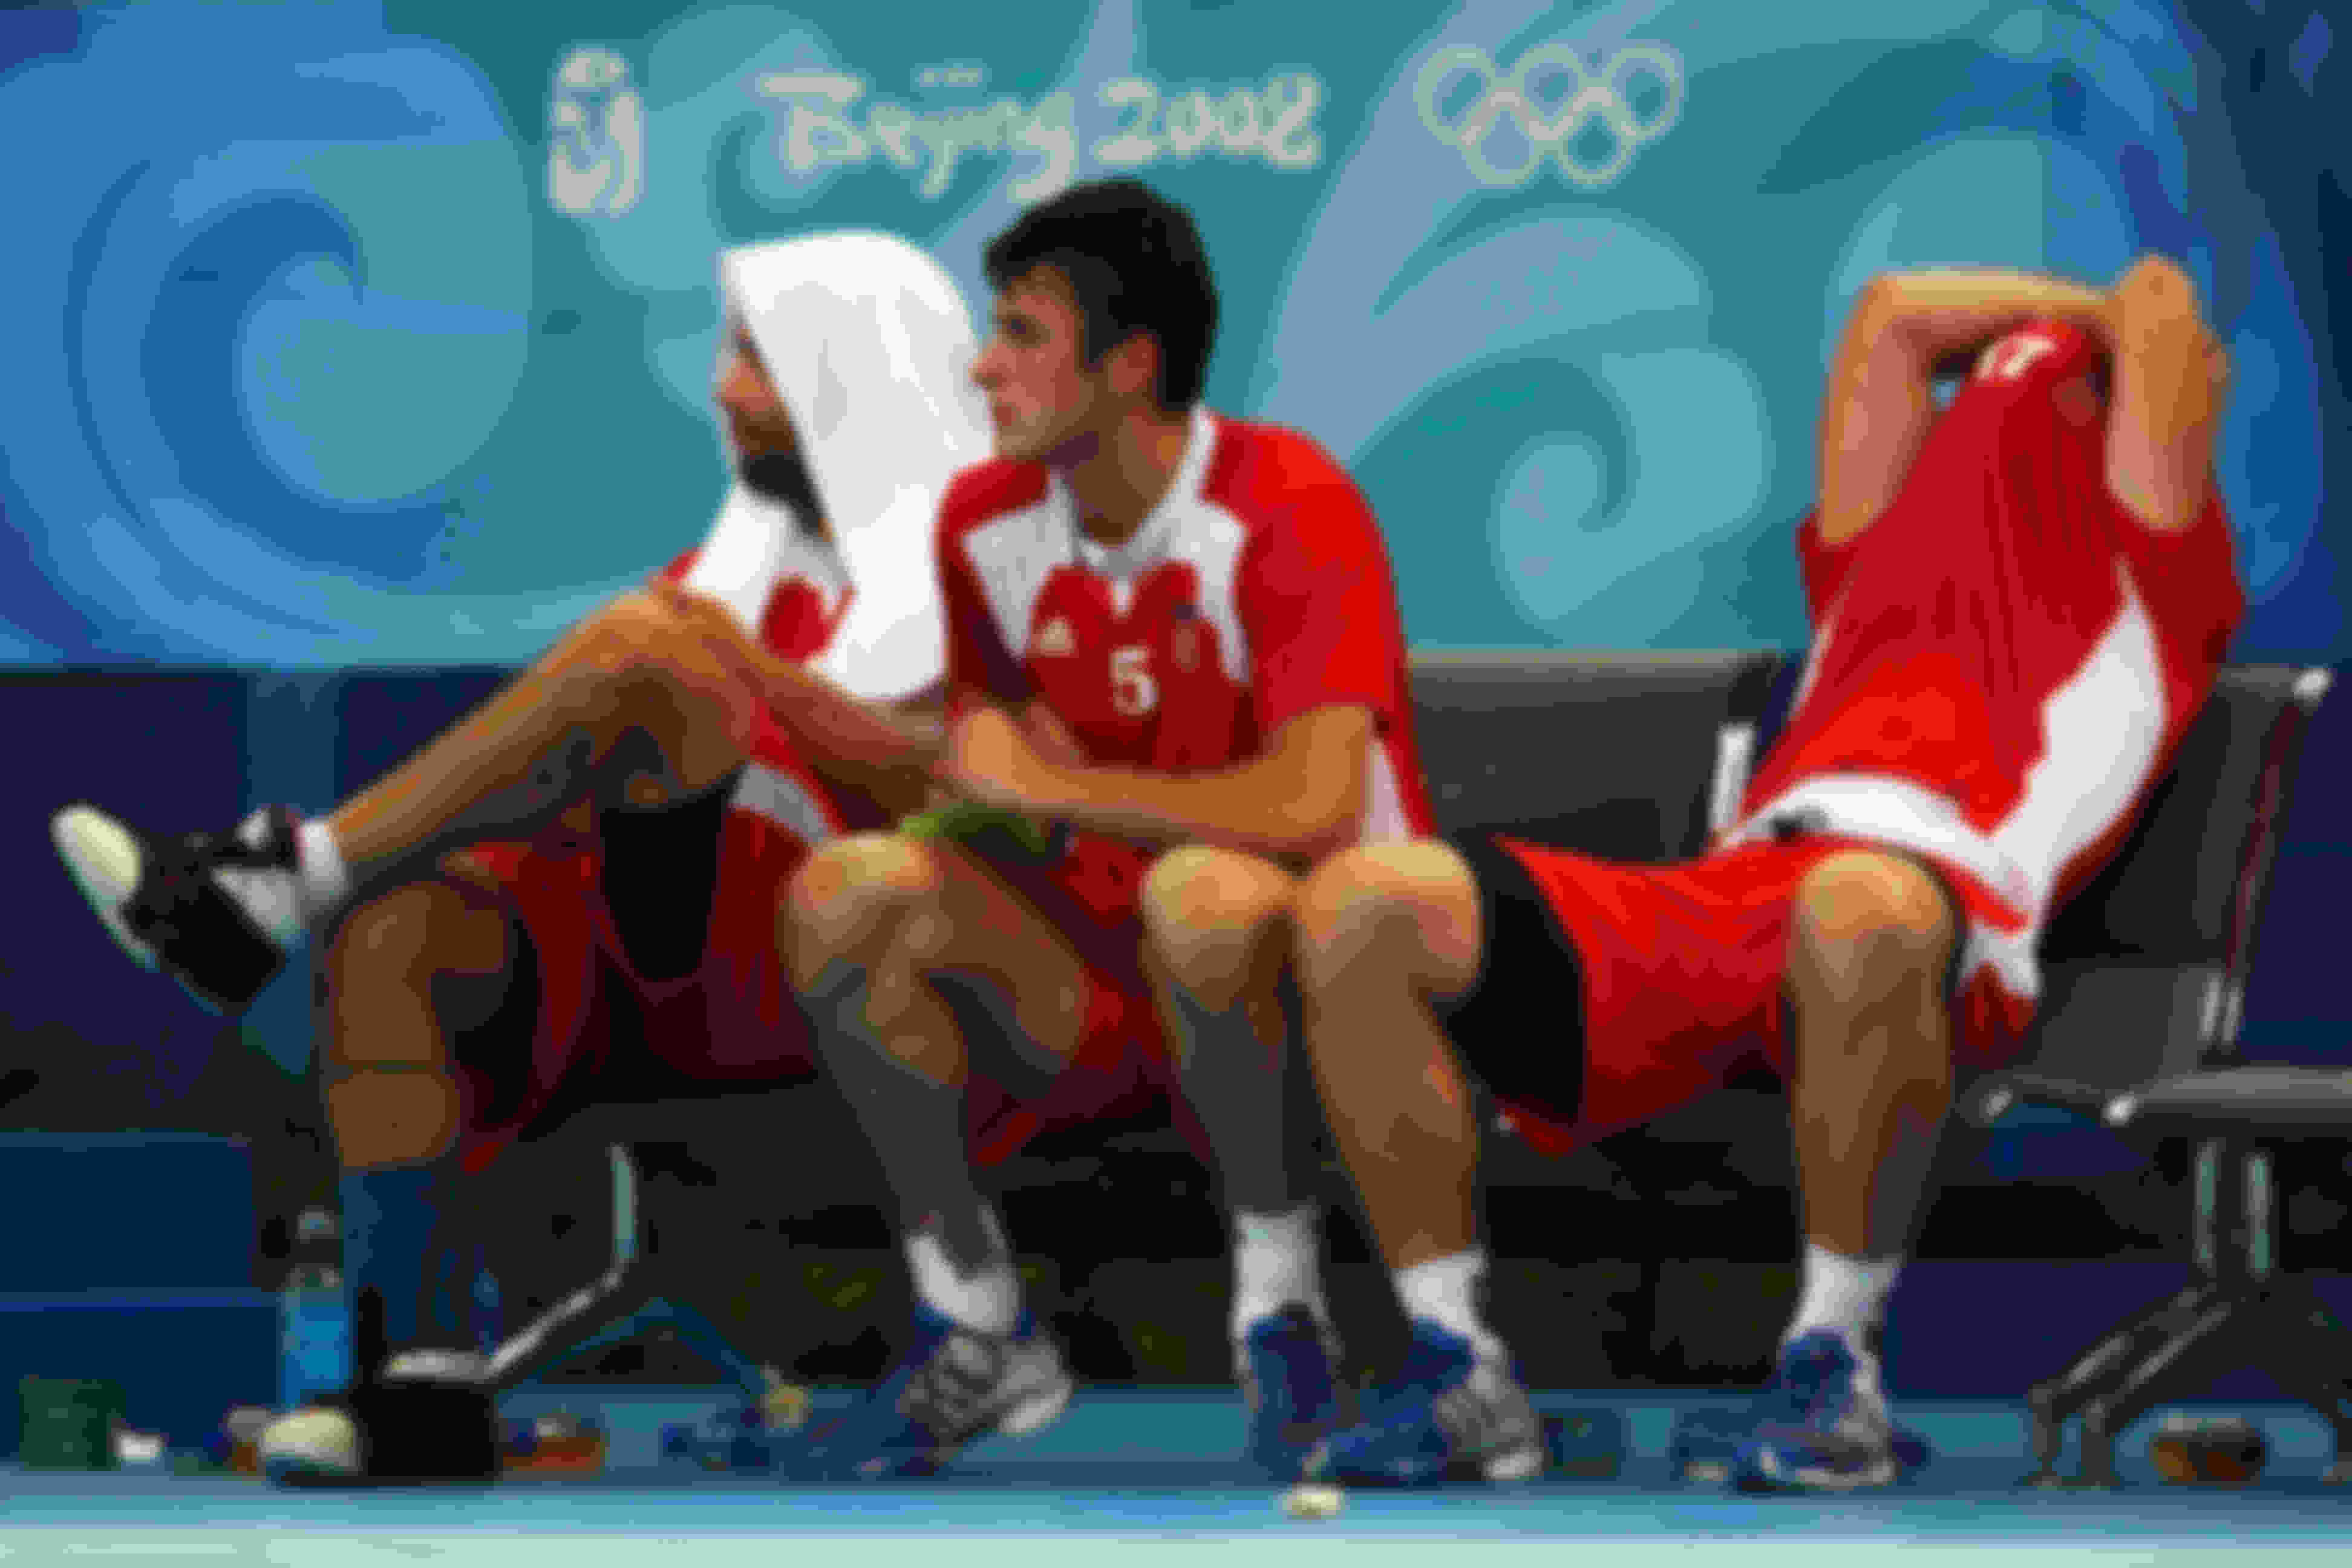 Domagoj Duvnjak with his Croatian teammates, dejected after losing the the Beijing 2008 bronze medal match. (Photo by Vladimir Rys/Getty Images)